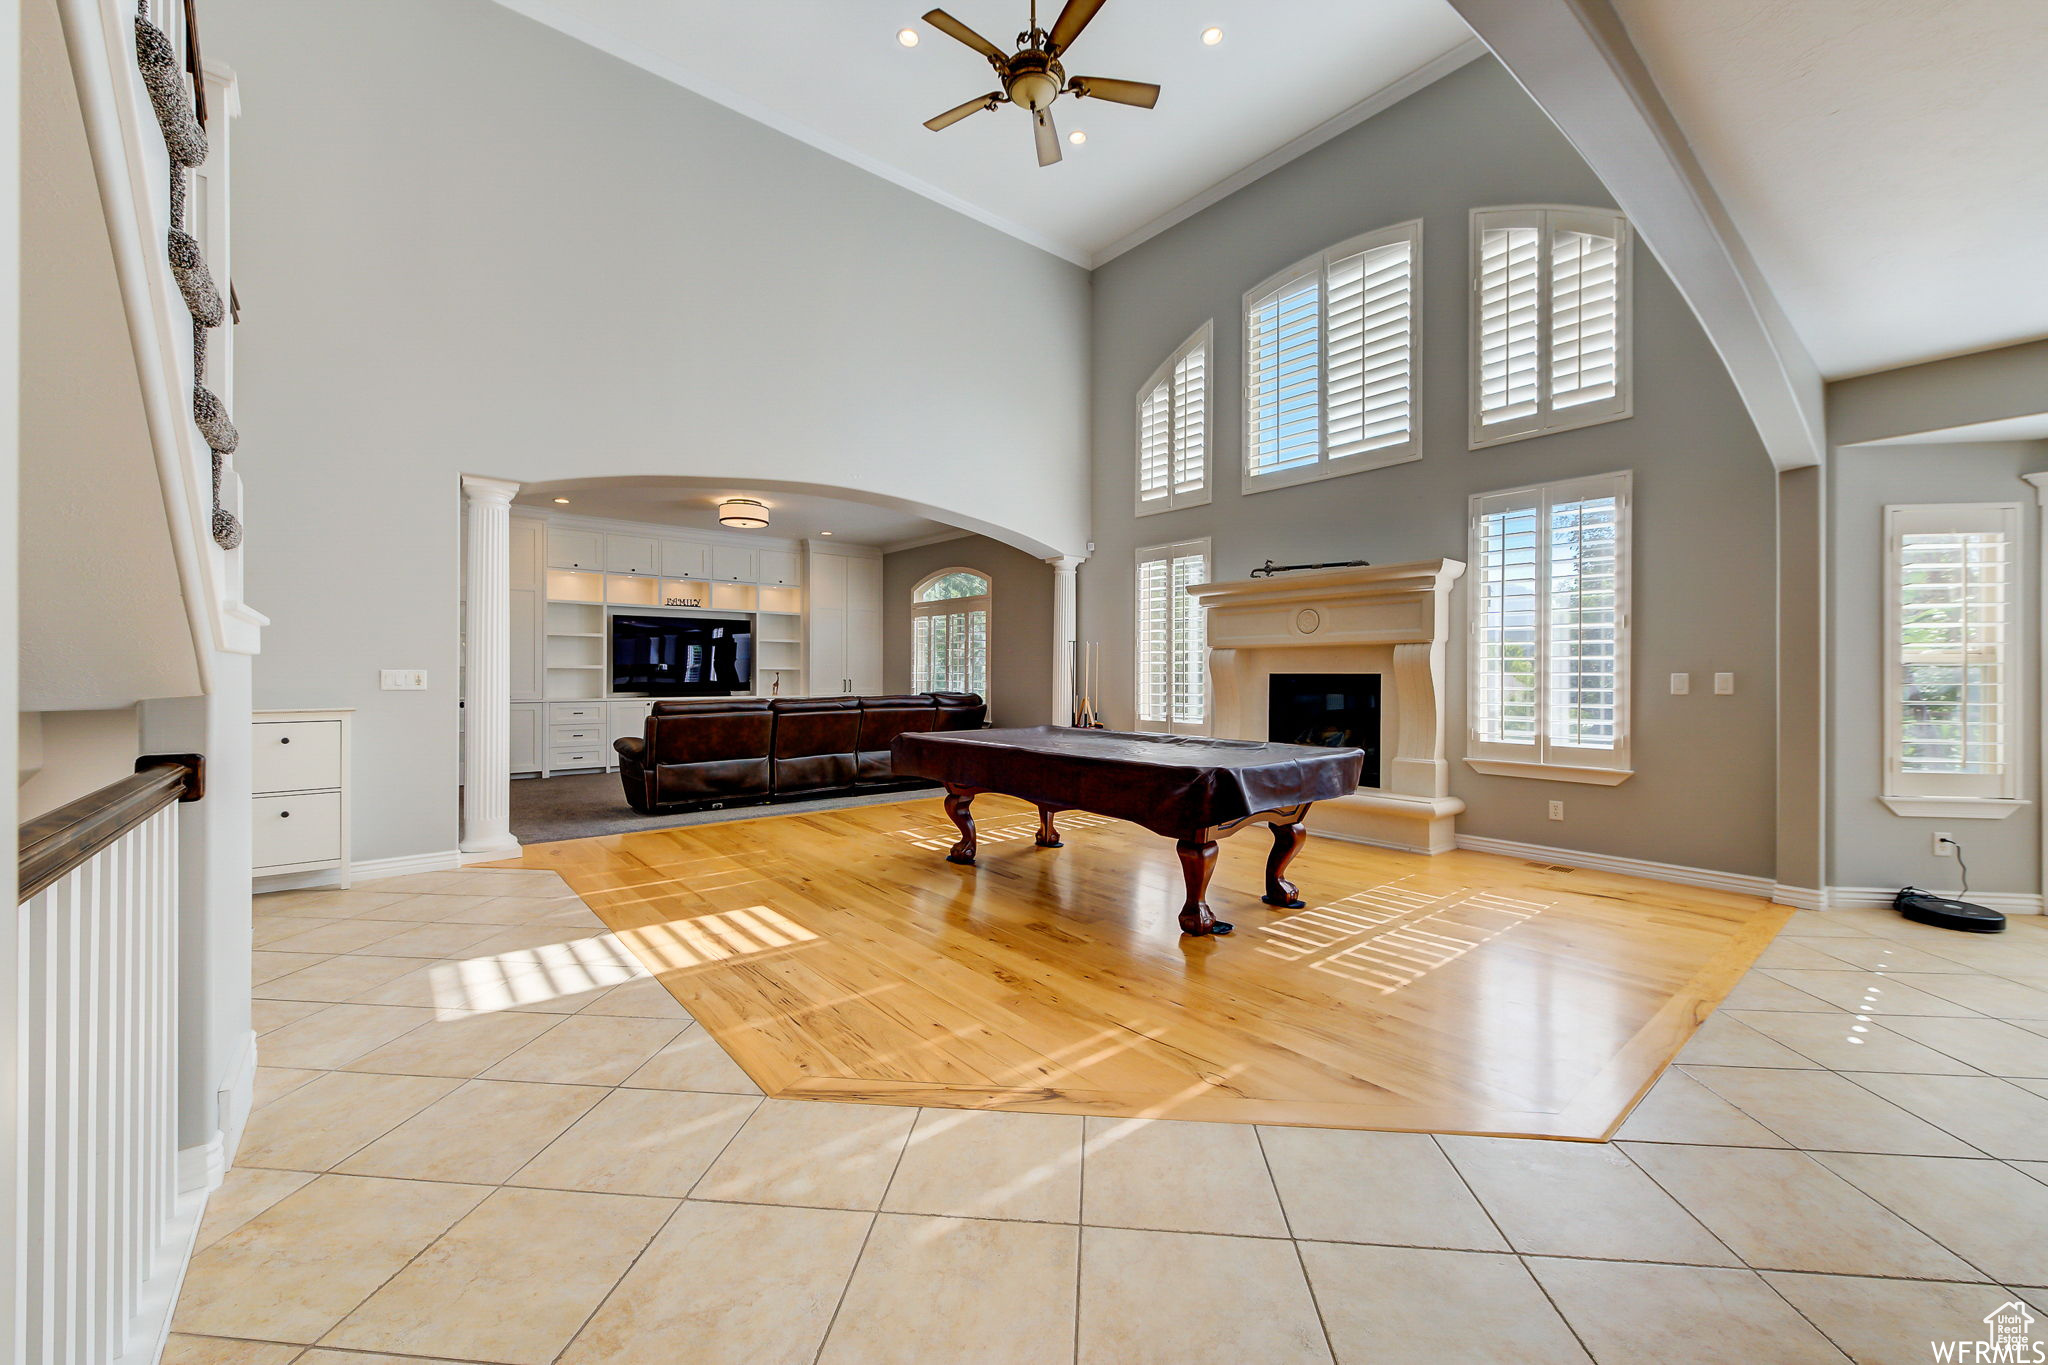 Playroom featuring pool table, high vaulted ceiling, ceiling fan, and light tile floors